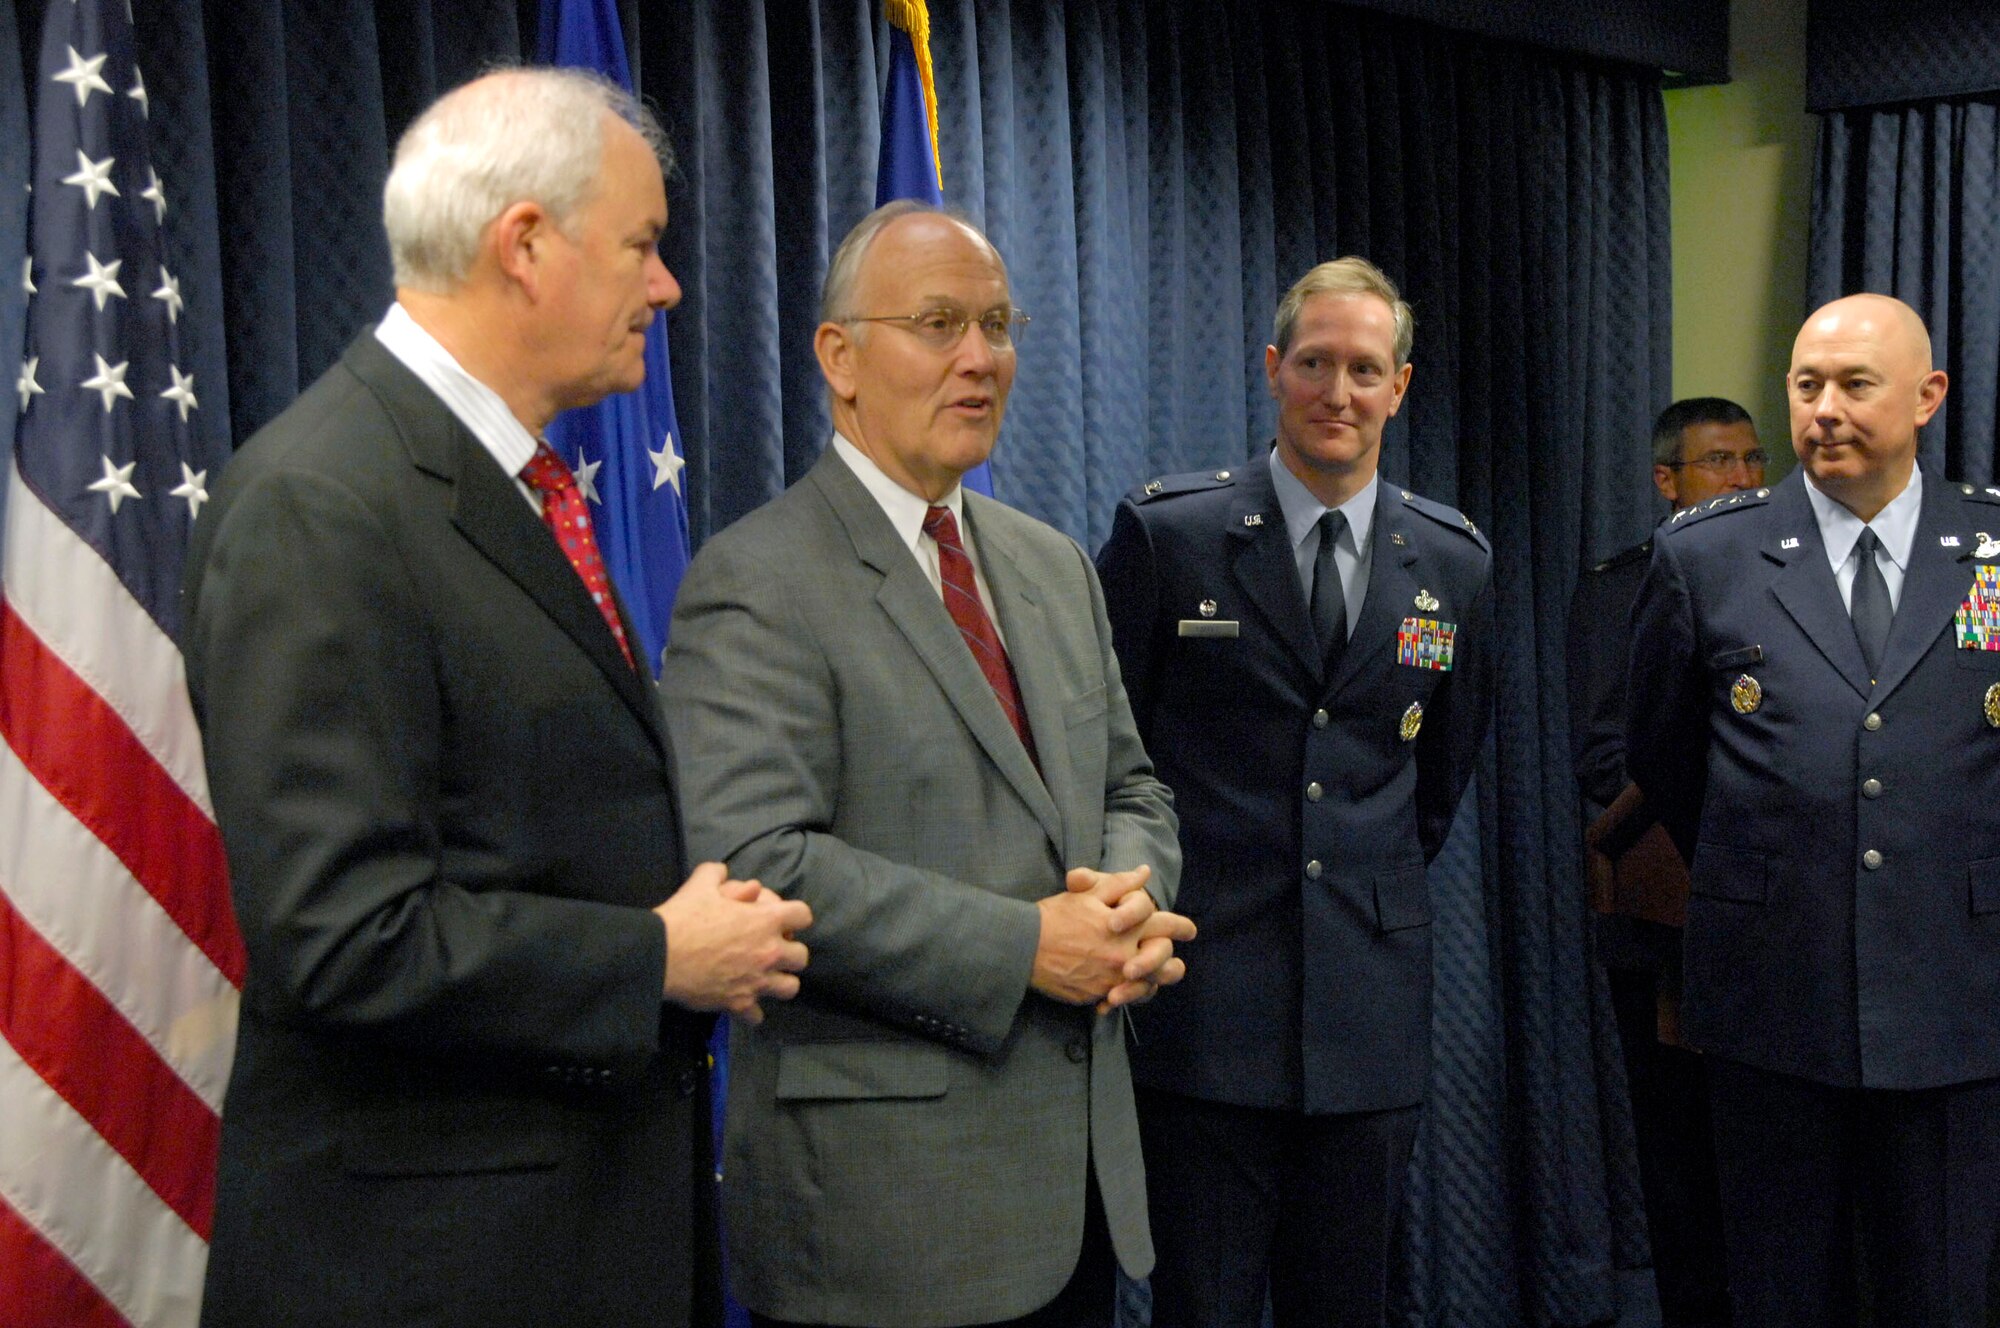 Secretary of the Air Force Michael Wynne, Idaho senator Larry Craig, 366th Mission Support Group commander Col.Tom Laffey and Air Force Chief of Staff T. Michael Moseley gather for opening remarks May 3 prior to the presentation of the 2007 Installation Excellence Award to Mountain Home AFB, Idaho at the Pentagon in Washington, D.C. Standing out among the many great improvements made on the base was their robust energy program where they installed new boilers in multiple facilities, reducing heating costs by $1.2 million and later renegotiated natural gas rates, which slashed costs 24 percent, which in trn saved the base $800,000. (U.S. Air Force photo/Tech. Sgt. Cohen A. Young) 